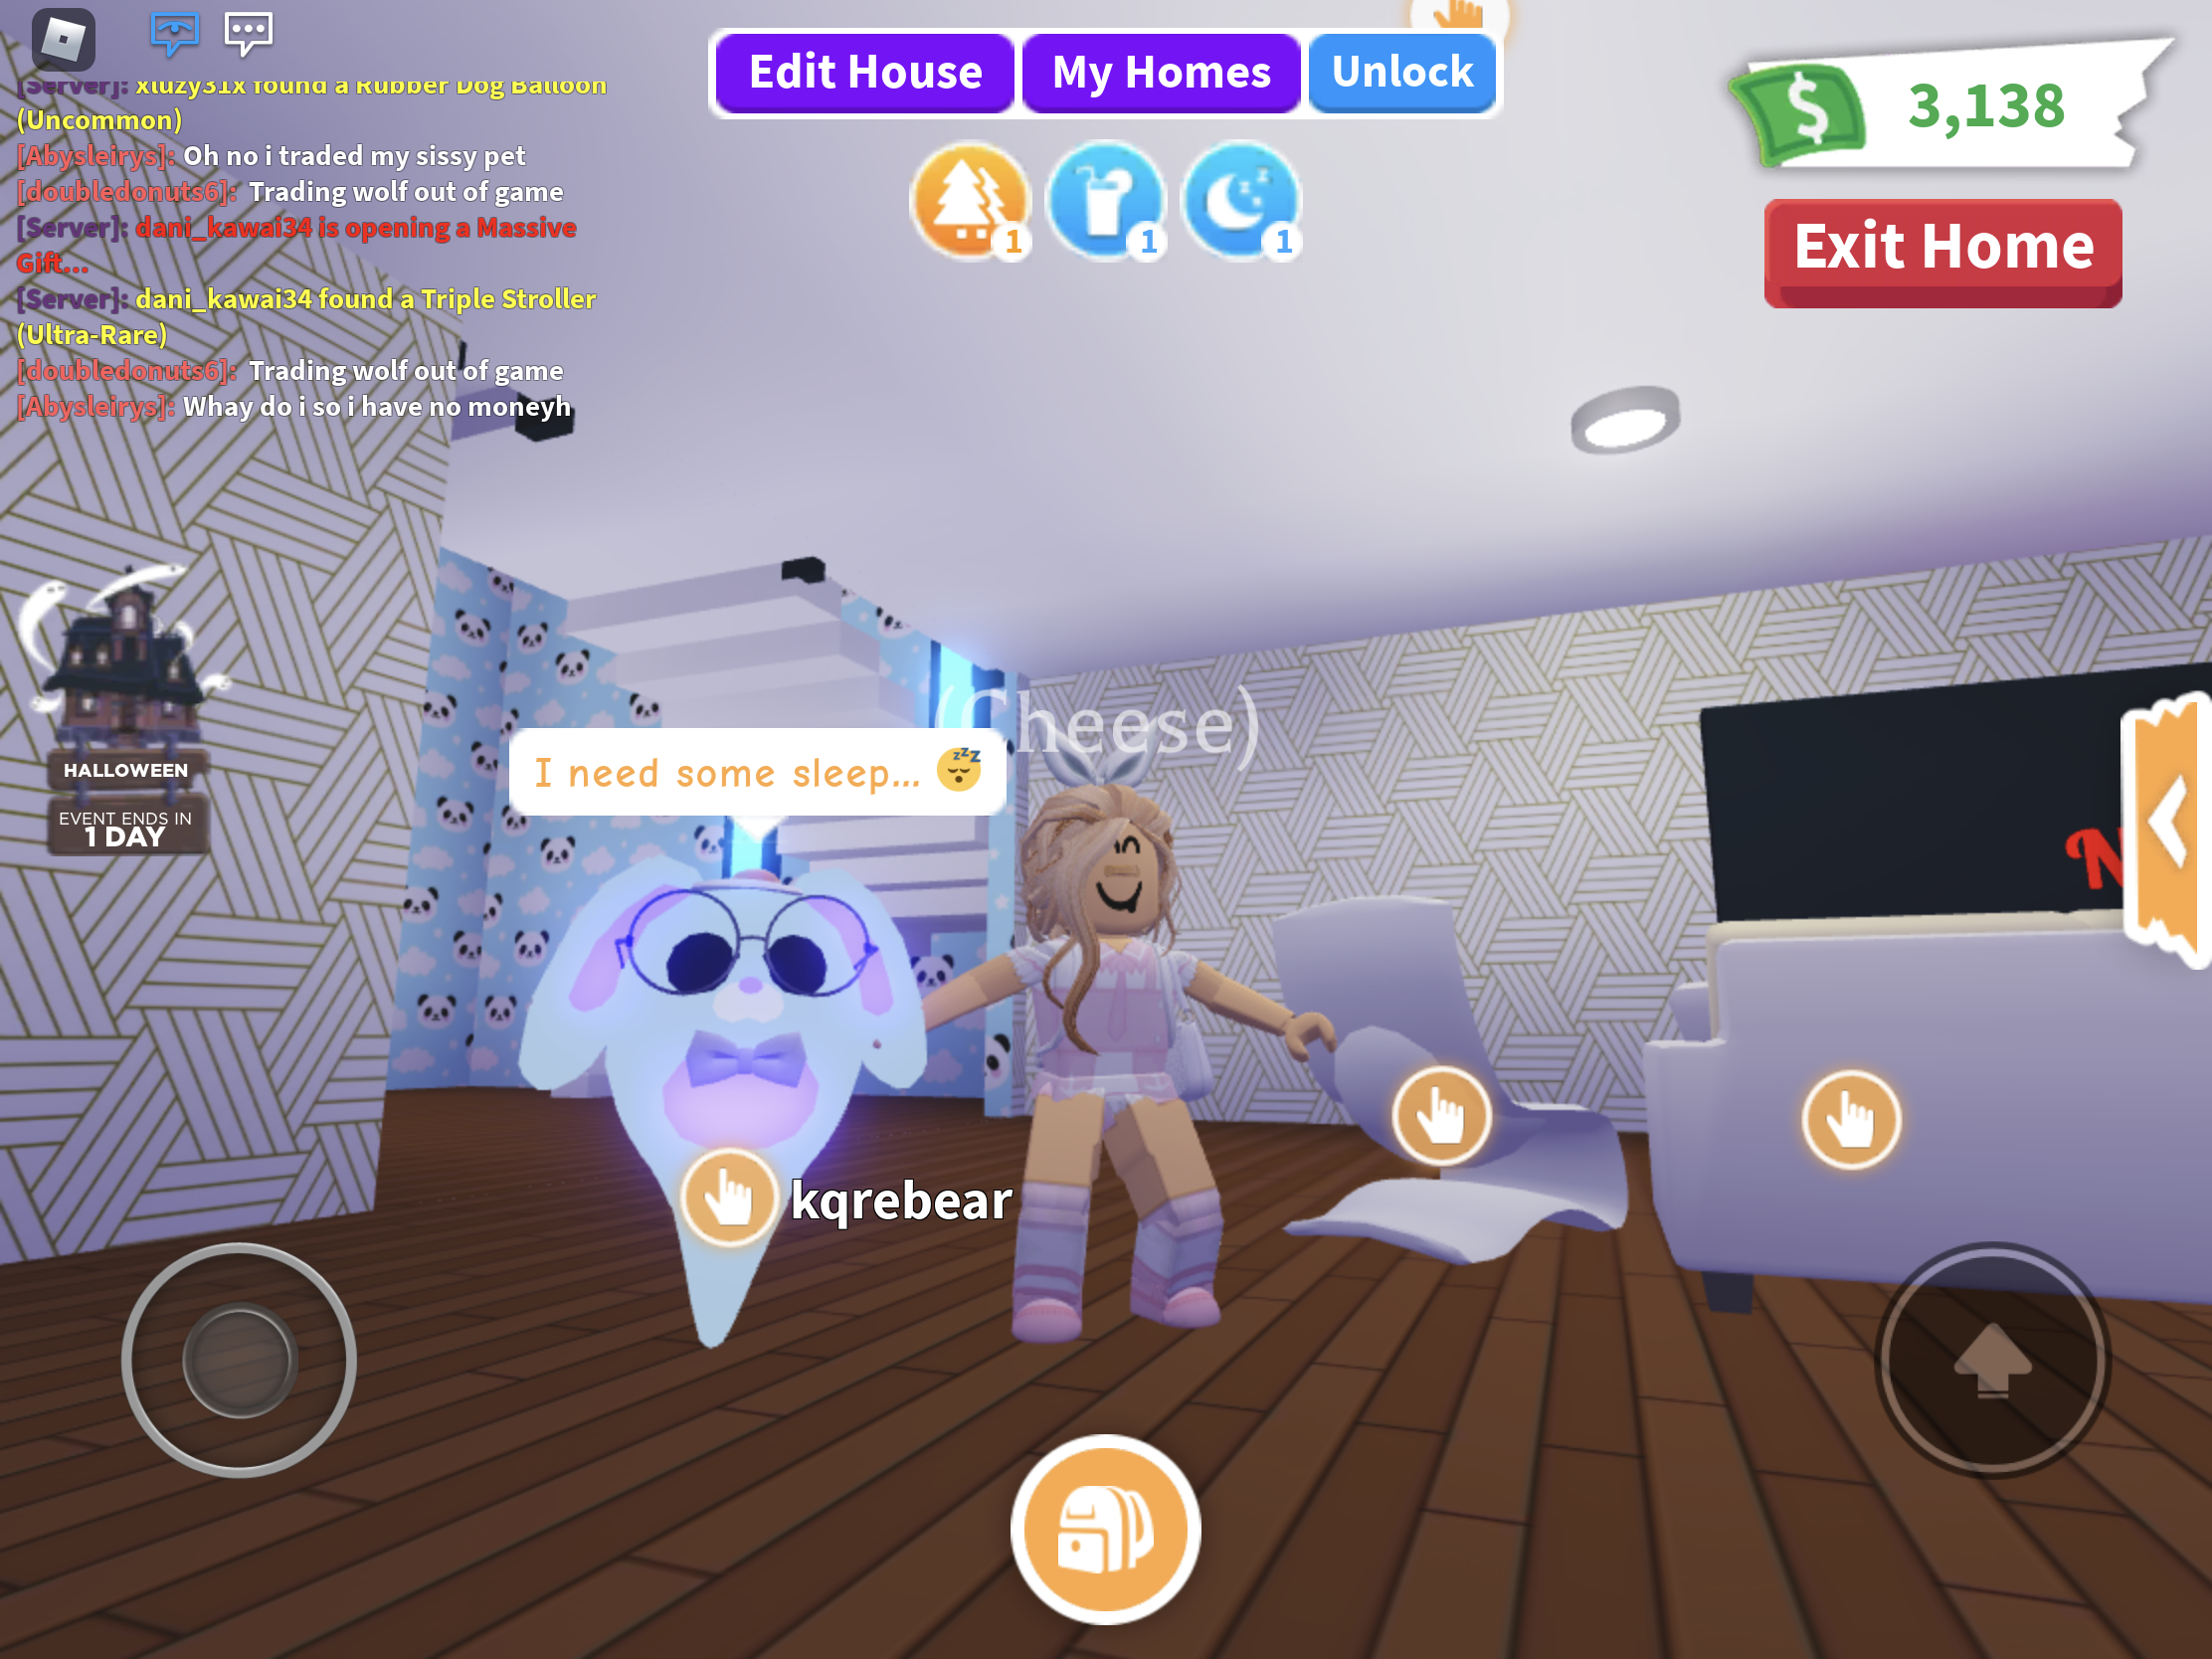 Fbykuijtrpg0zm - 101 best things i want to buy images miniture things roblox